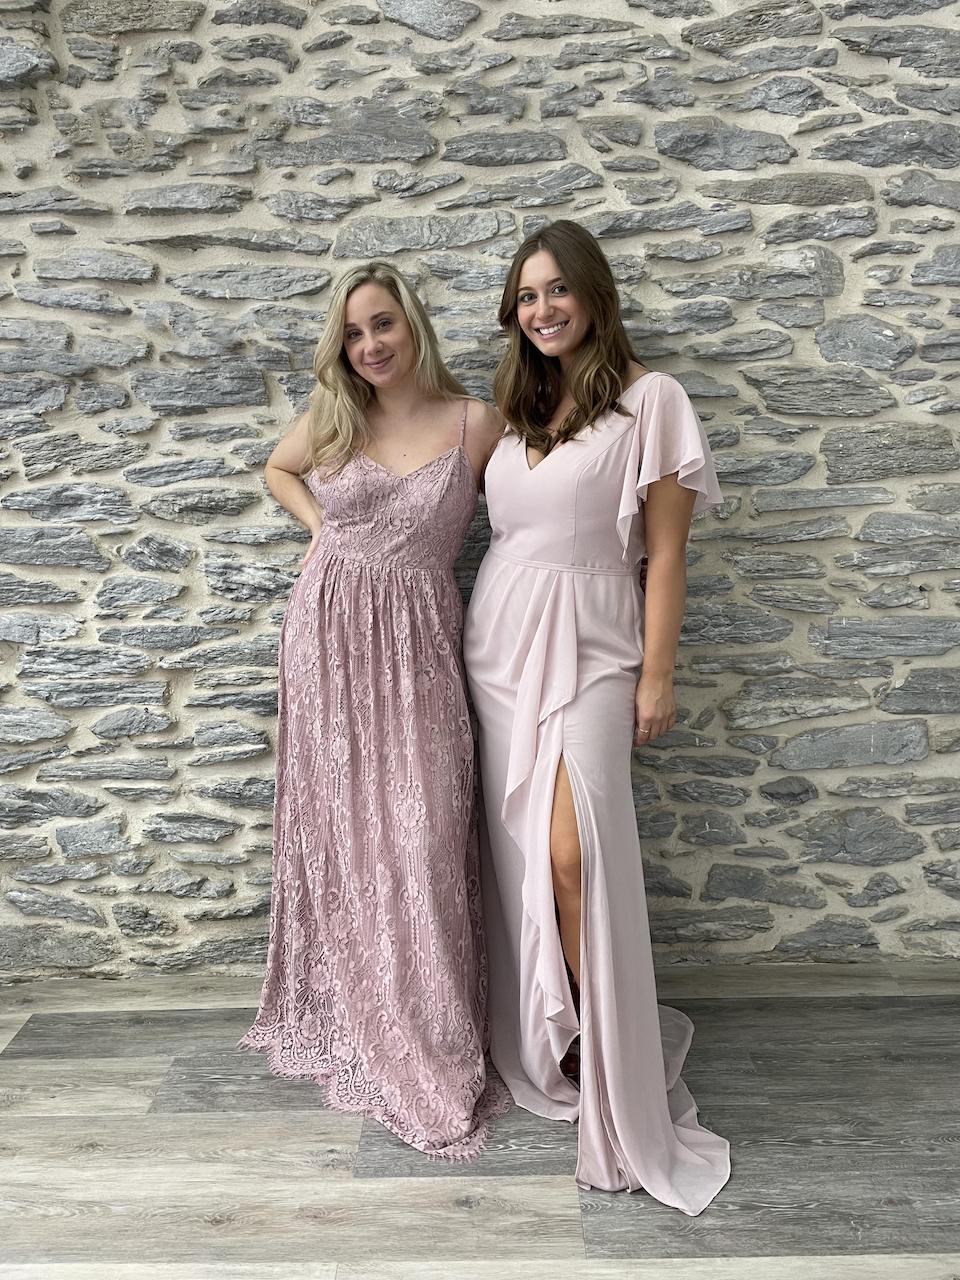 Playing with Pinks: Rose Gold, Pink and Blush Bridesmaid Dresses